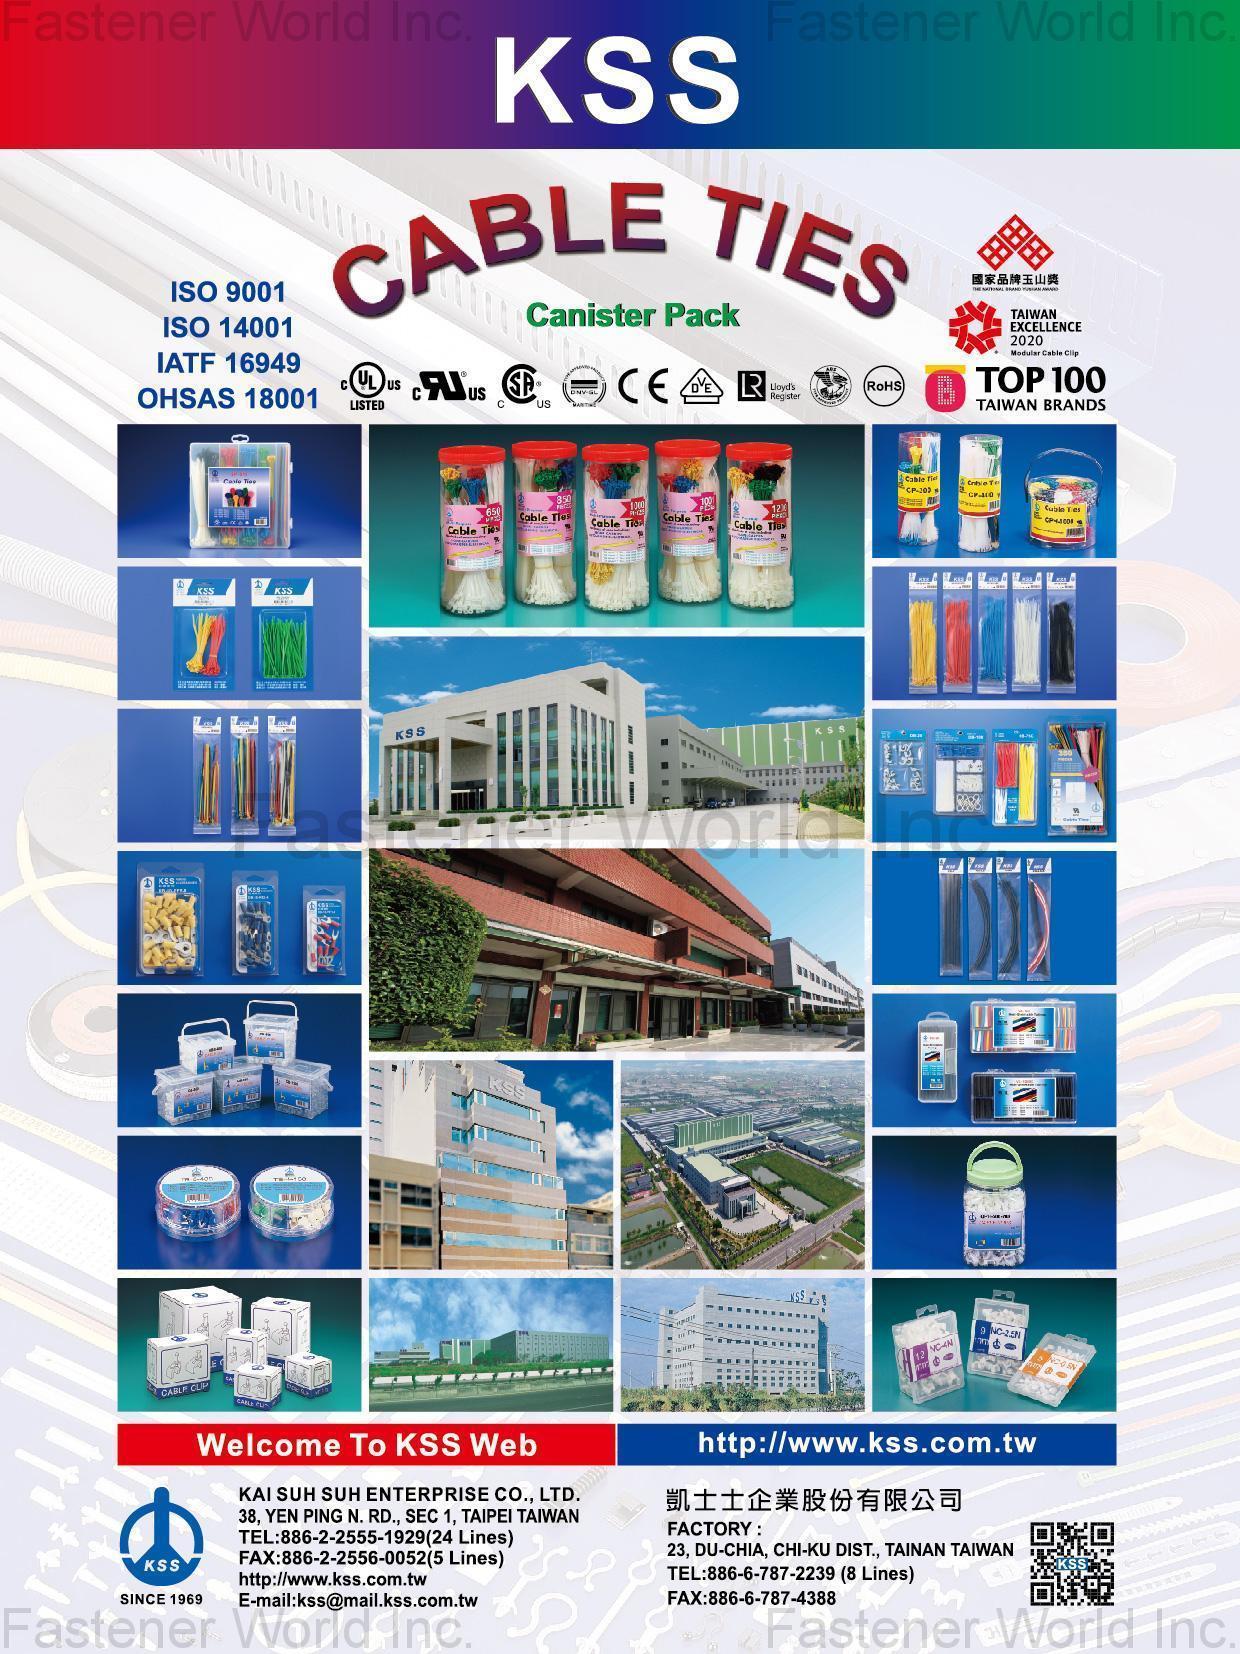 KAI SUH SUH ENTERPRISE CO., LTD. (KSS) , Wiring Ducts, Cable Markers, Cable Ties, Wrapping Bands, Cable Clamps, Glands, Conduits, Bushings, Wire Connectors, Tubes, Cable clips, PCB Parts, Fasteners, Value Pack, Heat-Shrinkable Tubings, Terminal, Tool, RJ45 Modular Plug And Plug Cover, U Connector , Cable Ties